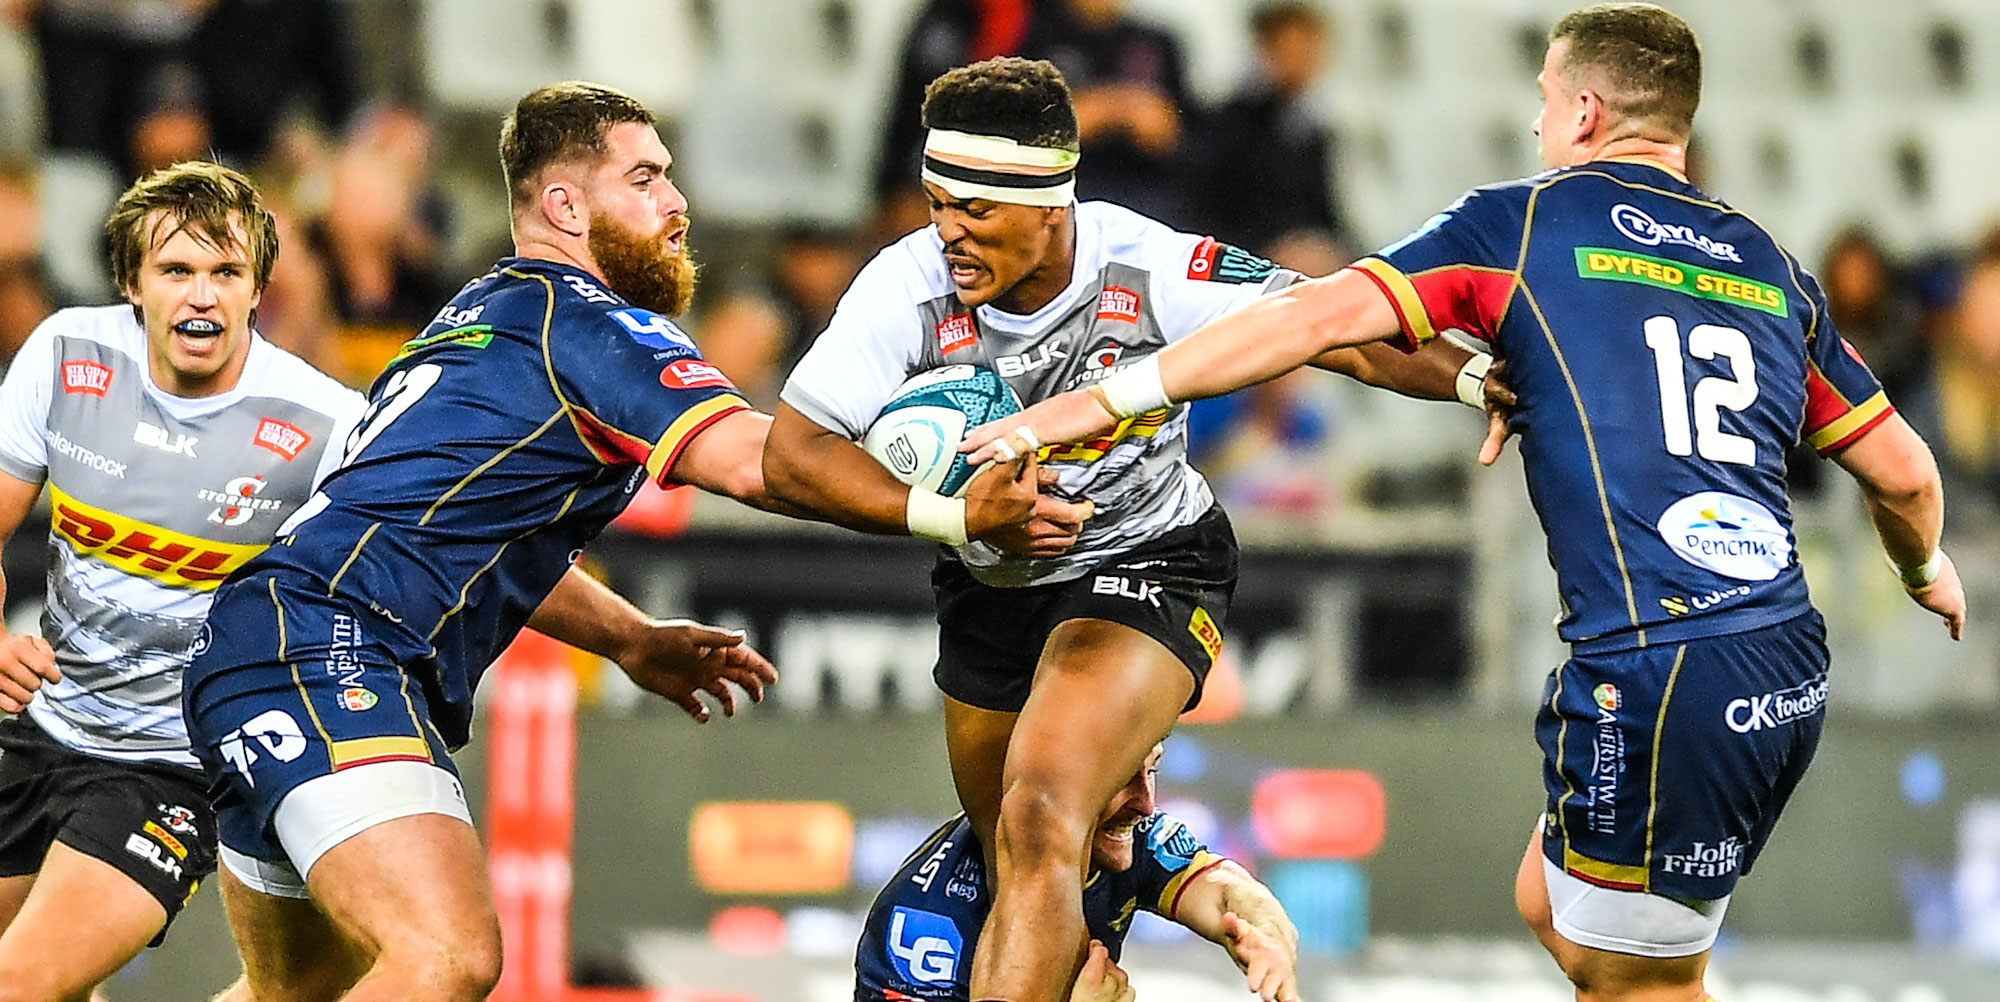 The DHL Stormers' Angelo Davids on the attack last weekend against the Scarlets.